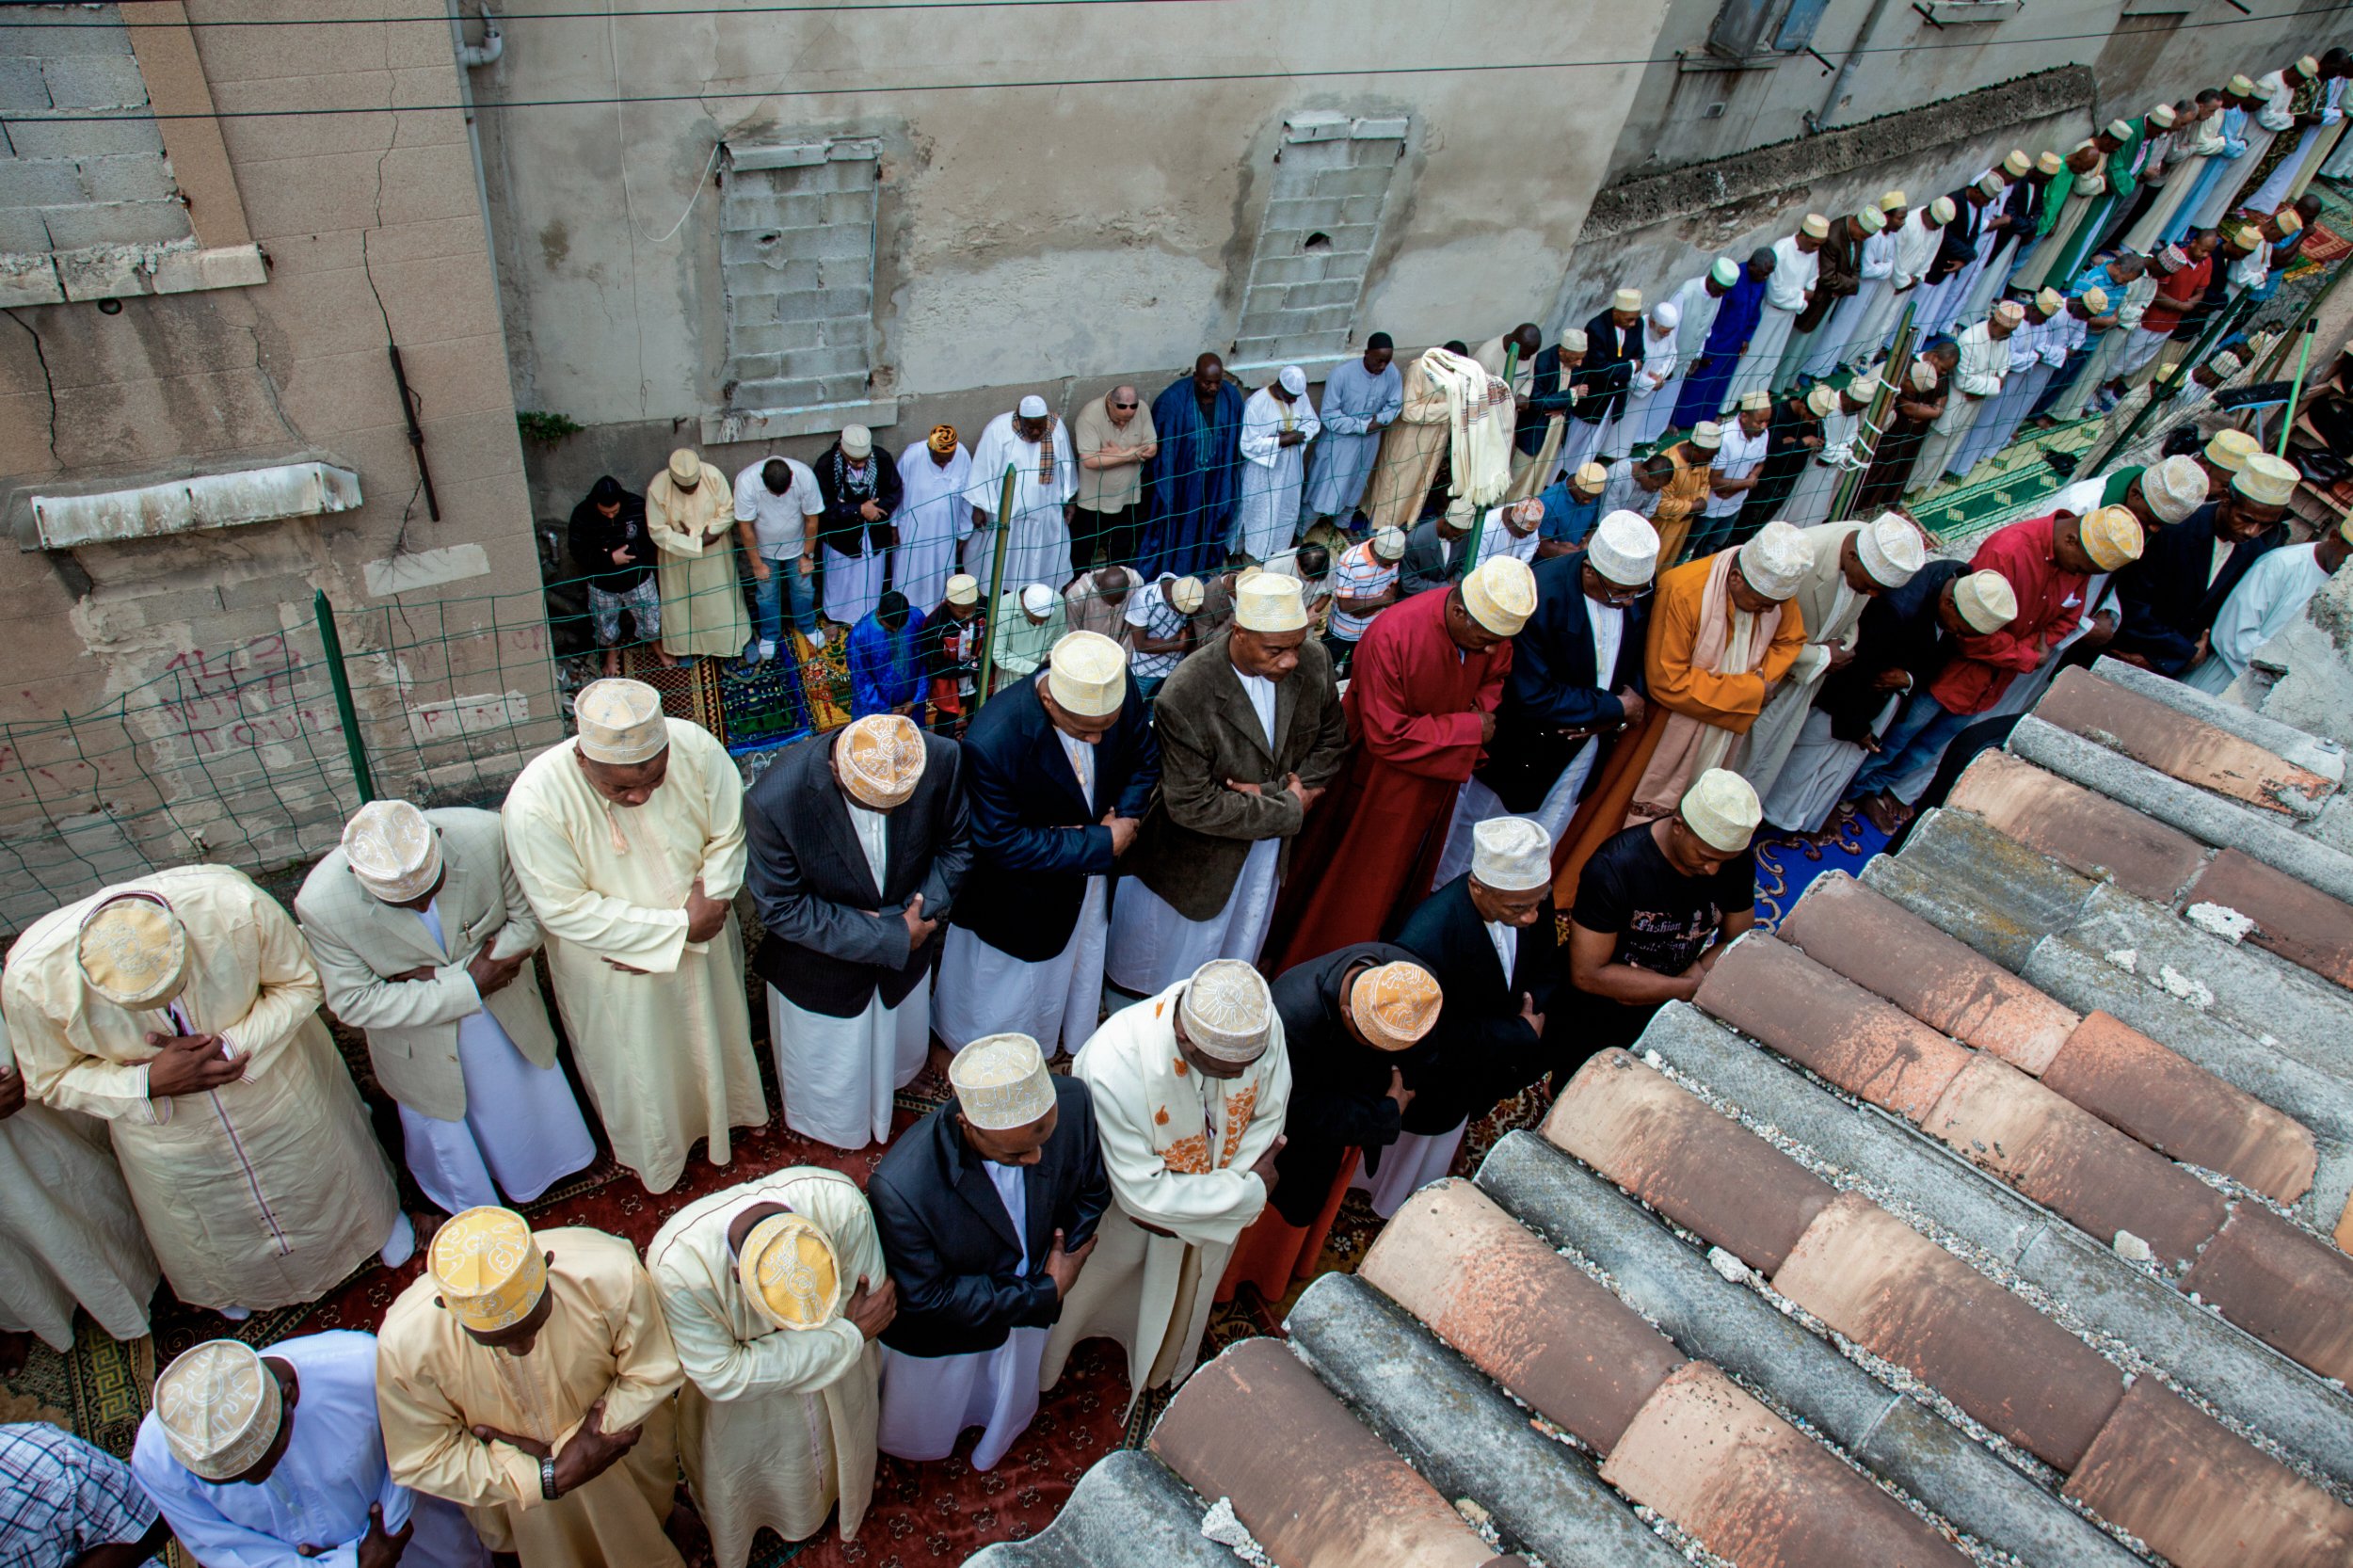  Camorians gather at the Mosque of Gaillard/Felix Pyat for Friday prayers in Marseille, France on Sept. 17, 2010. 